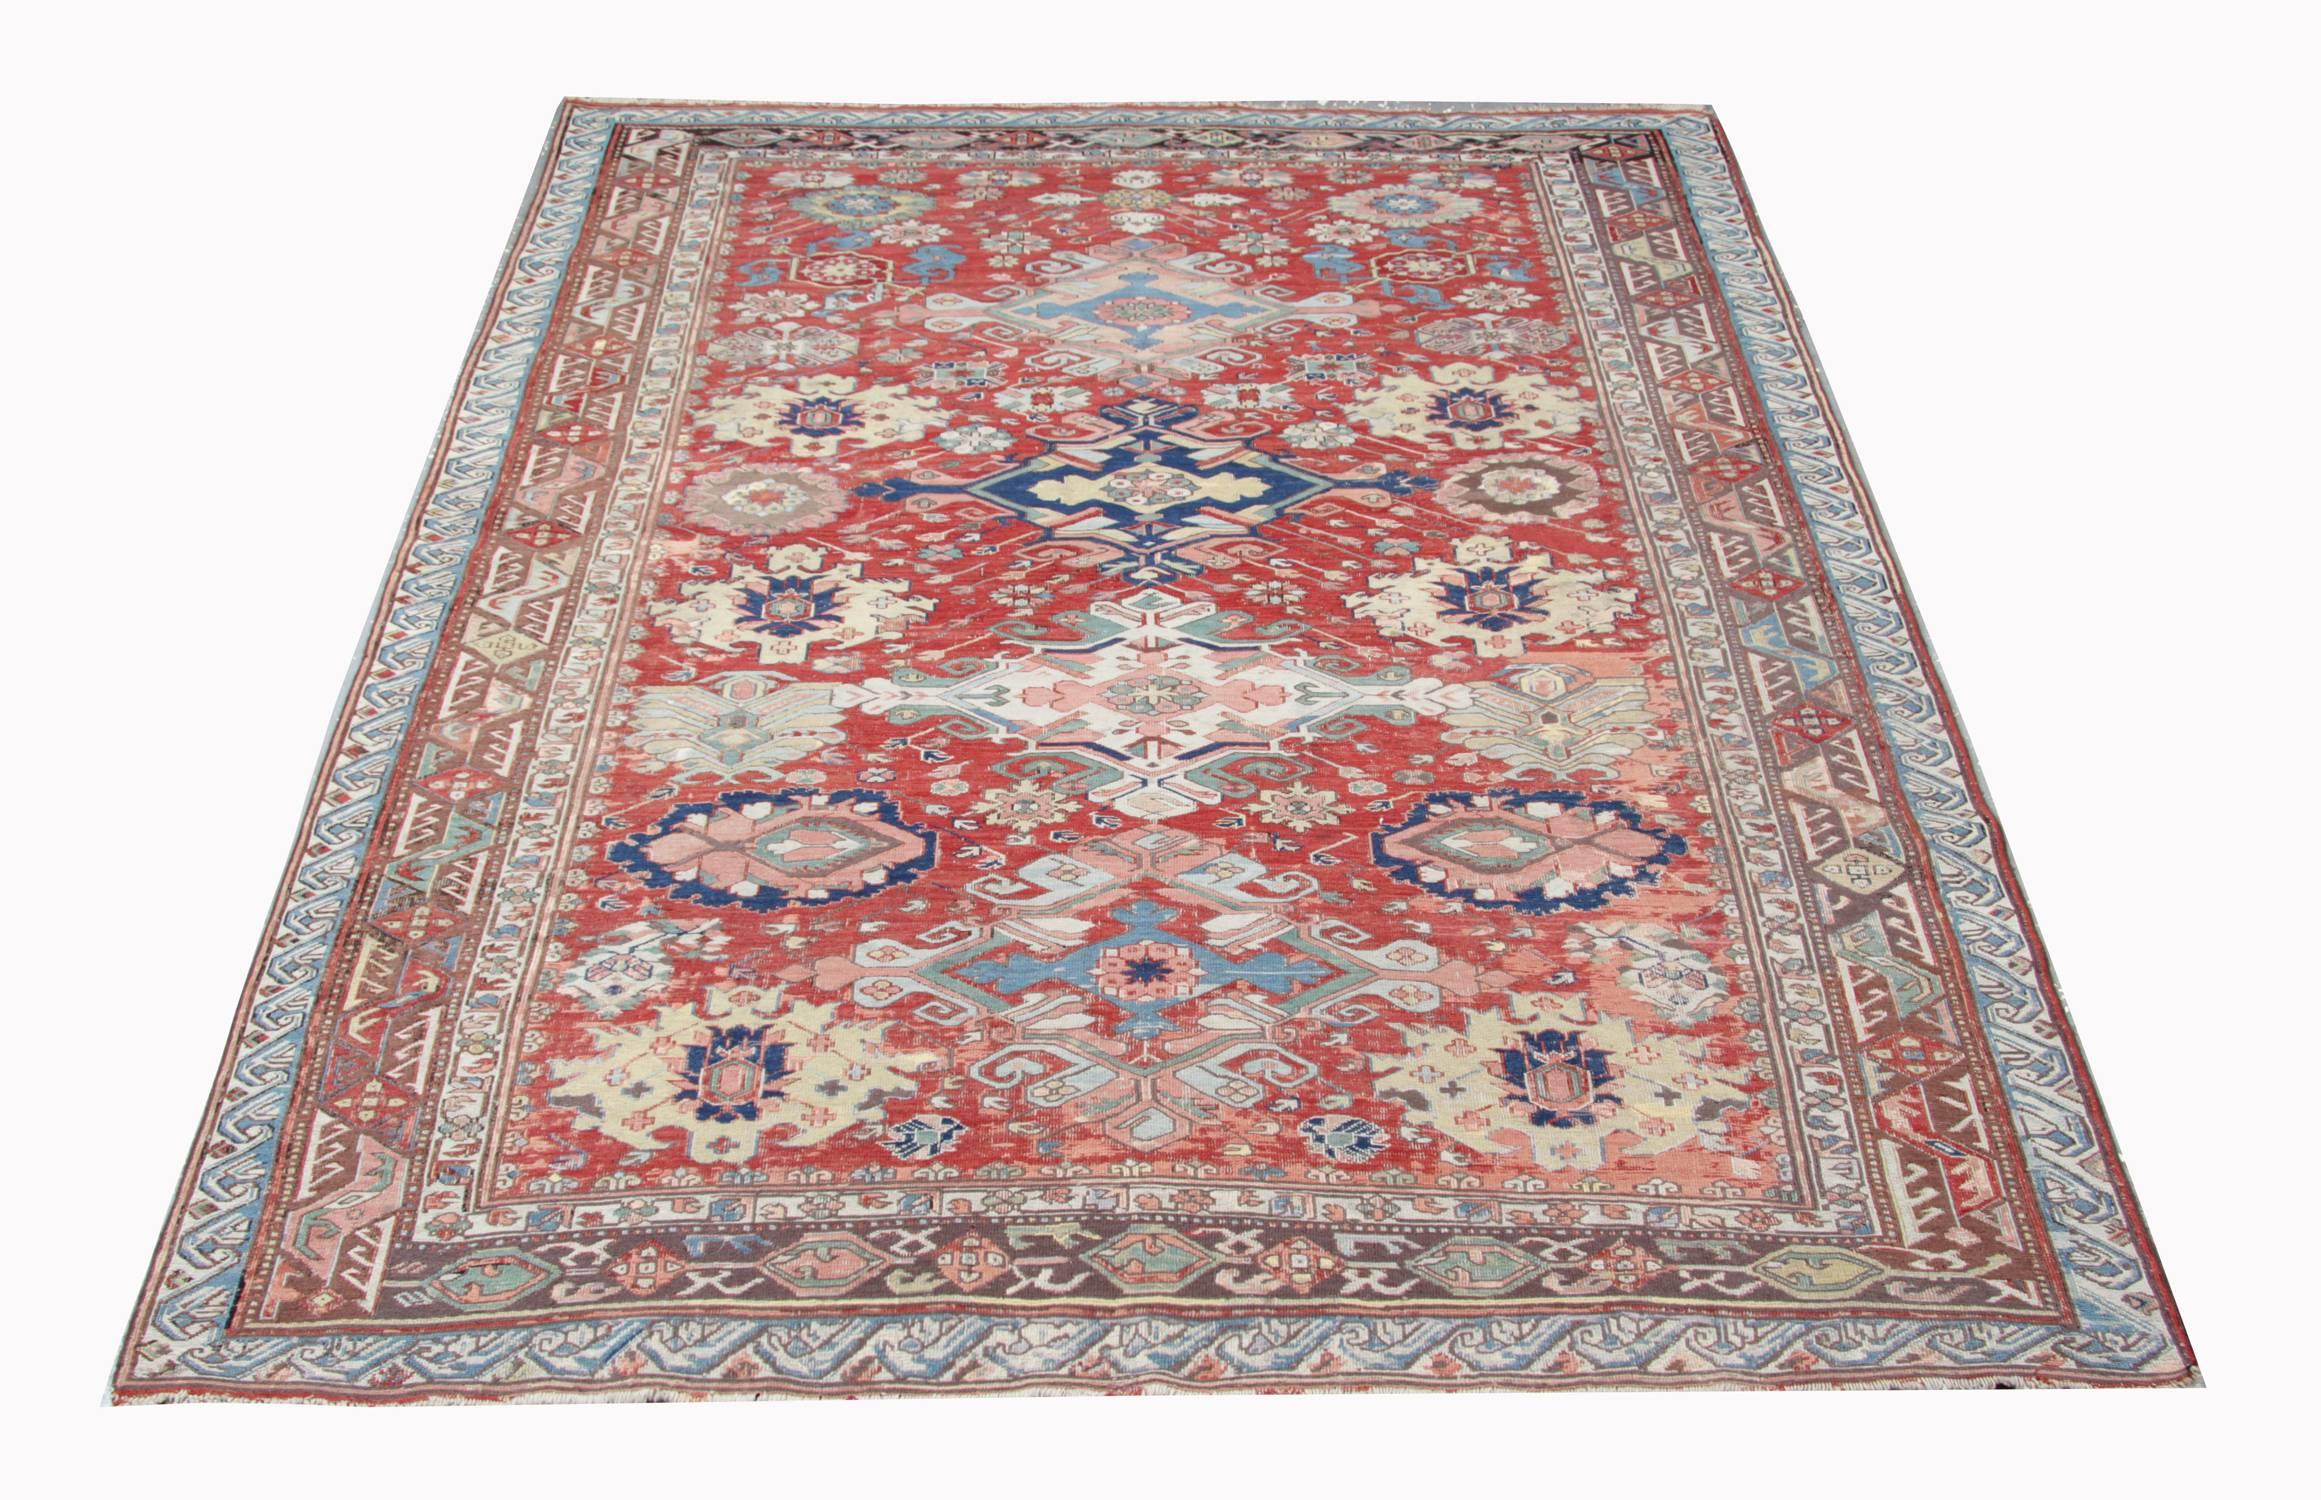 These magnificent antique kilim rugs have named Soumak piece woven in the Caucuses in the 1870s in the city of Kuba - boasts many of the qualities and characteristics most sought after by admirers and collectors of Caucasian art. 
These beautifully